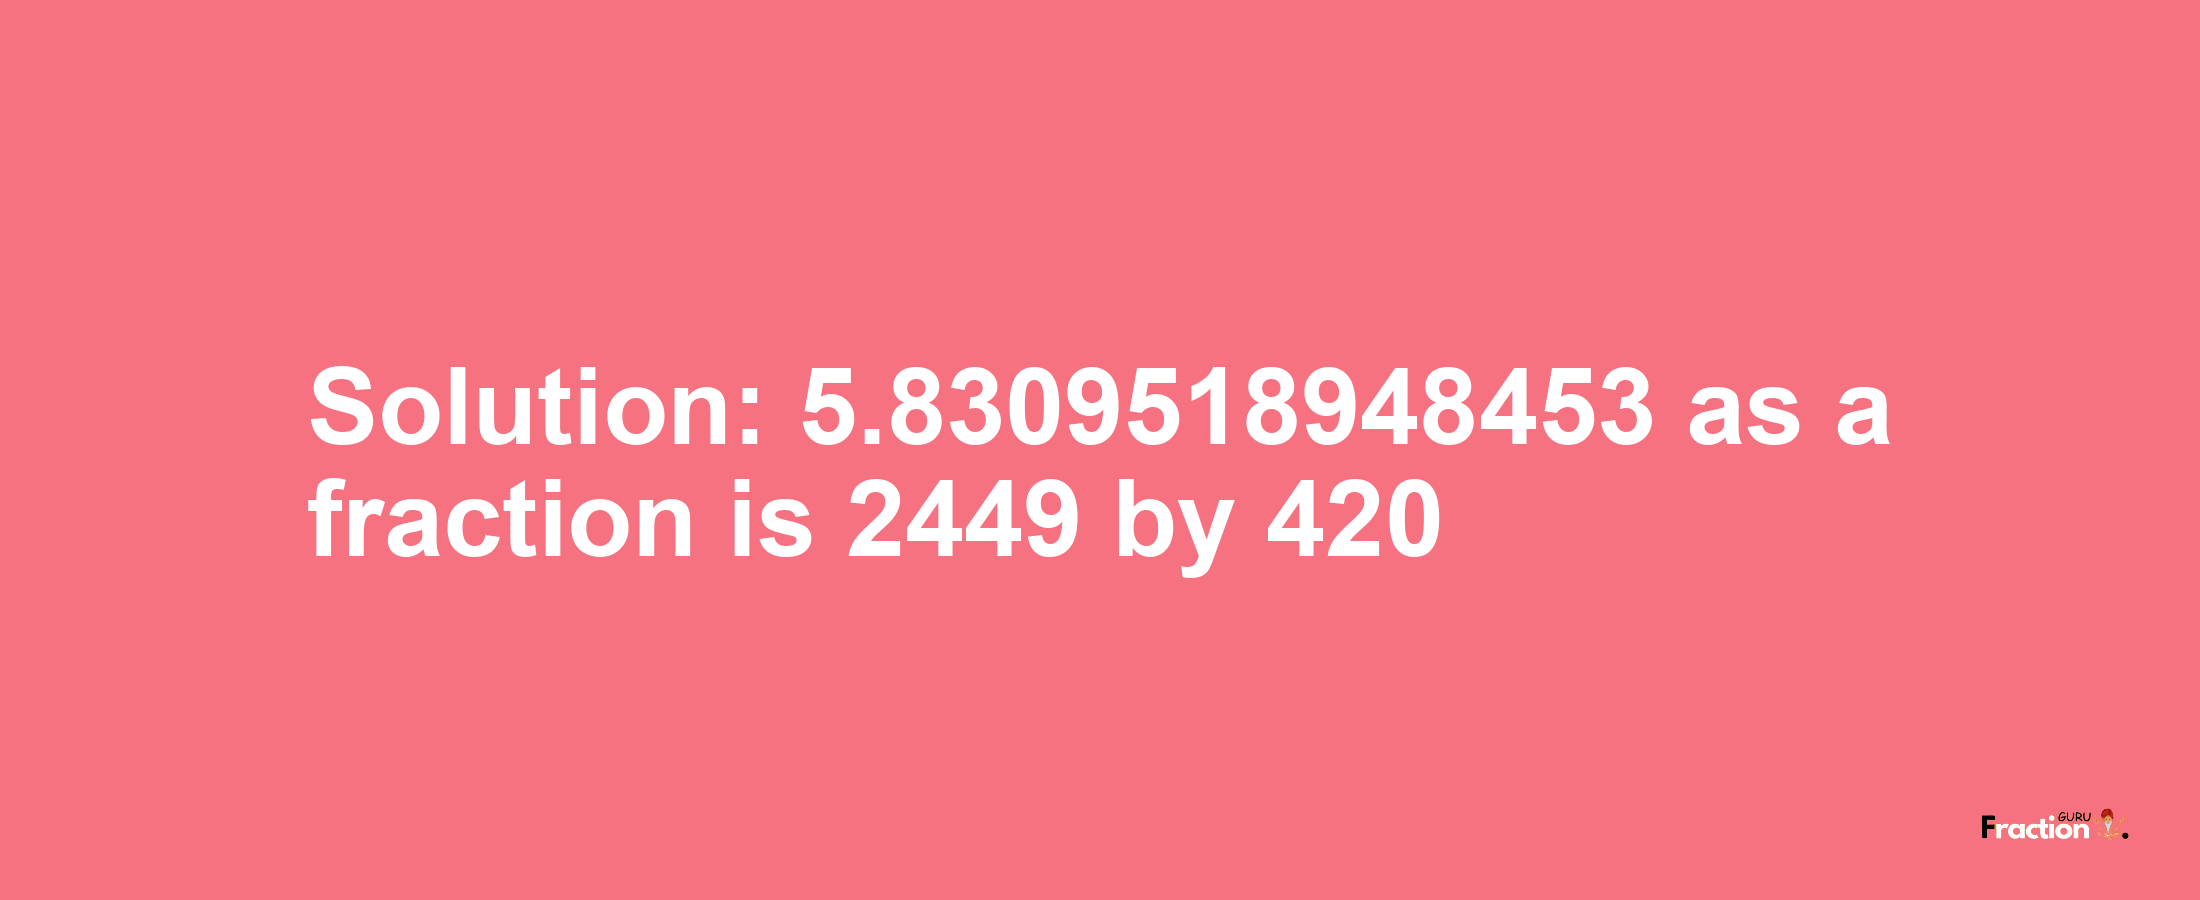 Solution:5.8309518948453 as a fraction is 2449/420